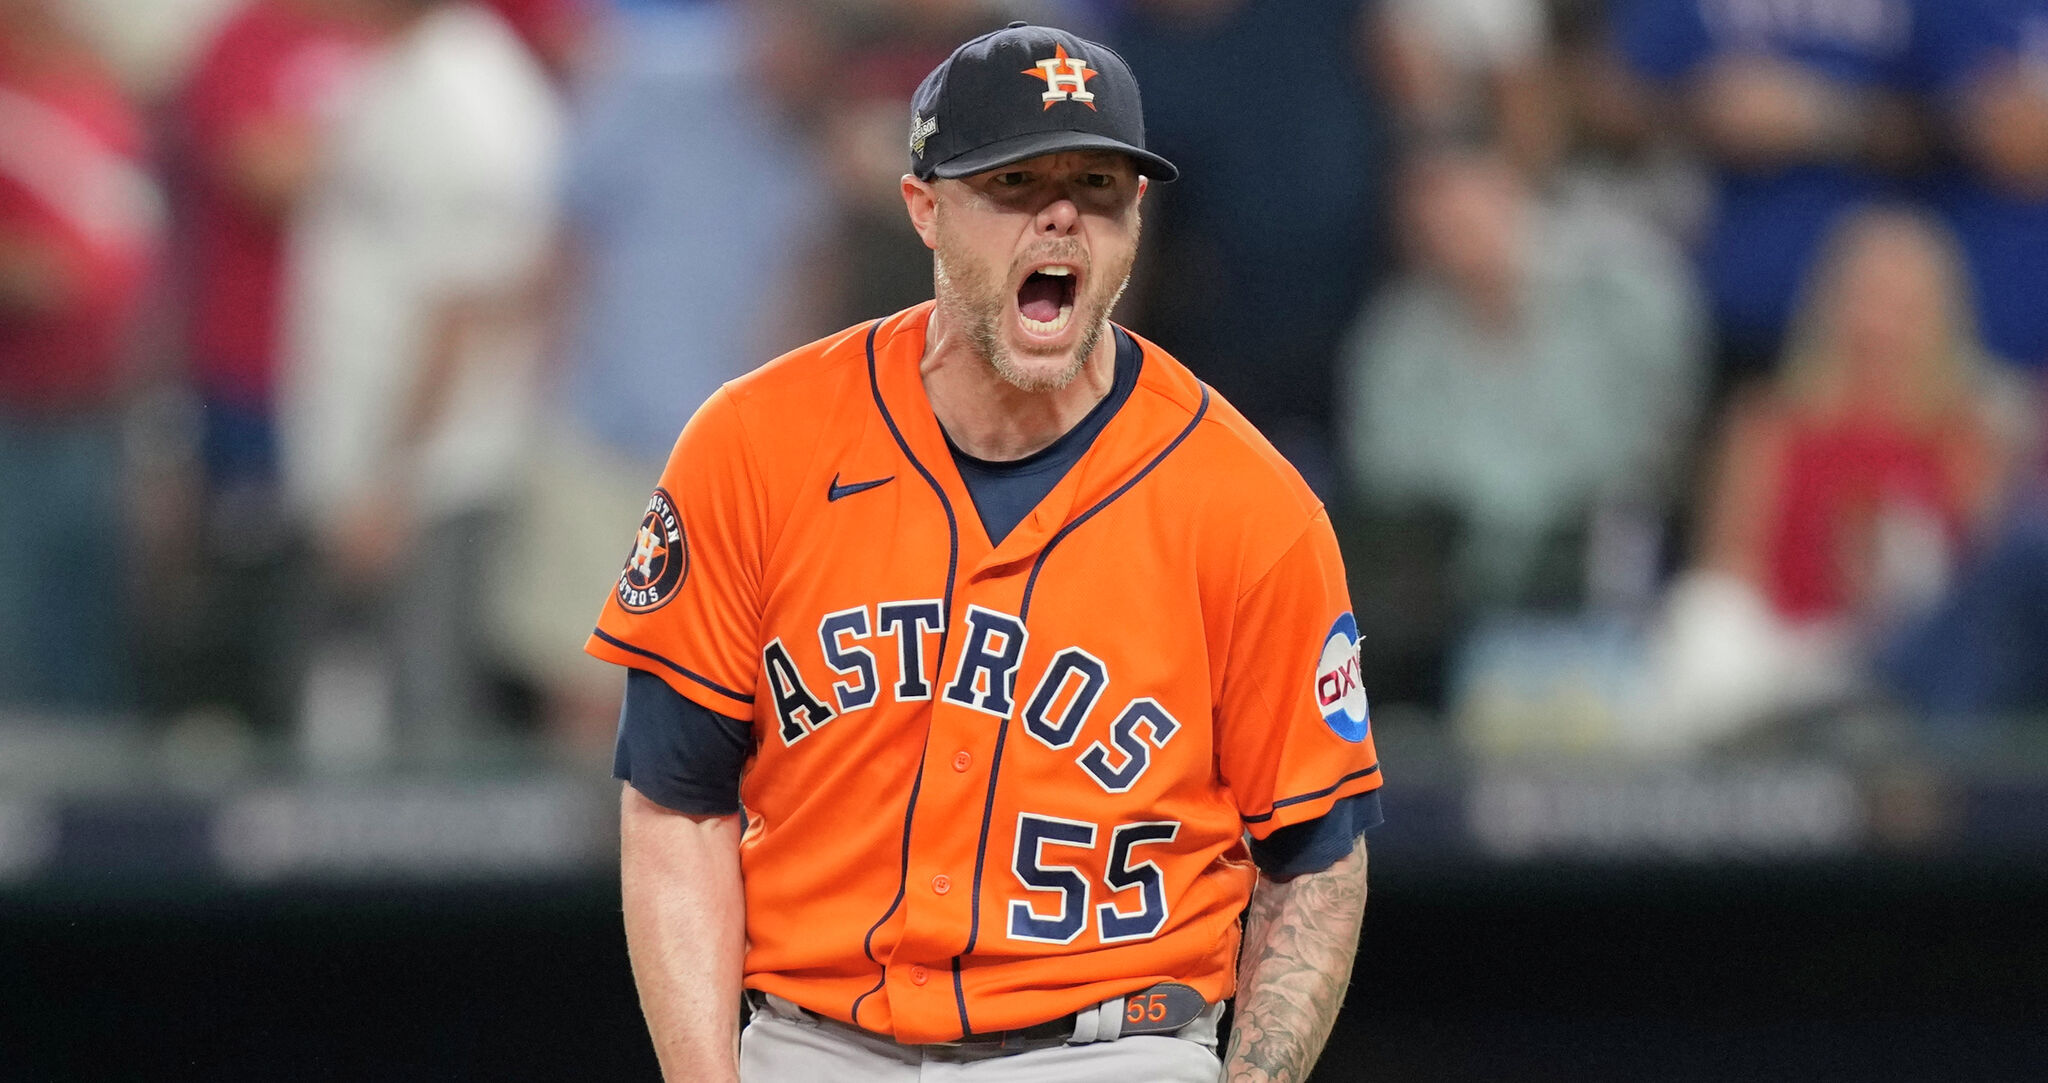 Astros: Ryan Pressly will be a critical bullpen piece in the playoffs